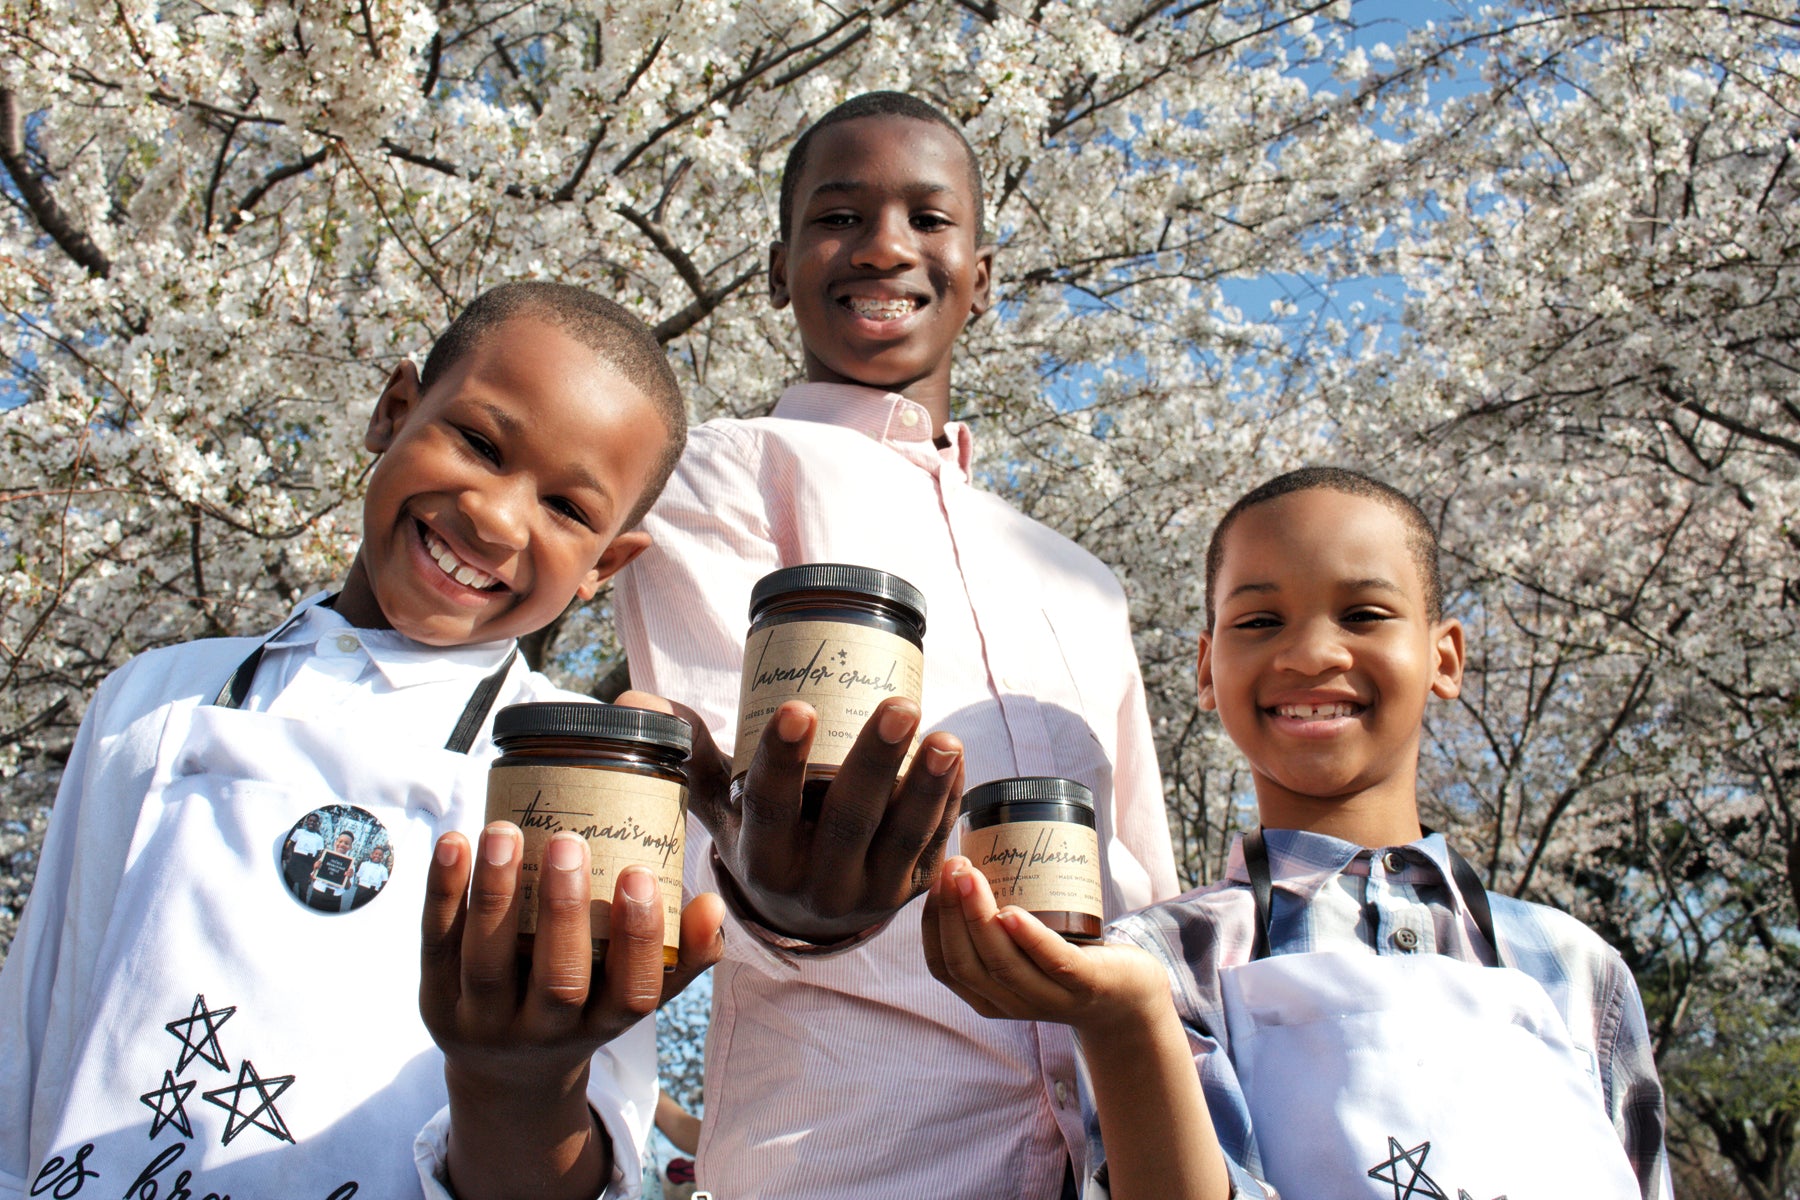 Portrait of Freres Branchiaux founders from left to right Ryan, Collin and Austin Gill standing under a cherry blossom tree, holding their handmade candles